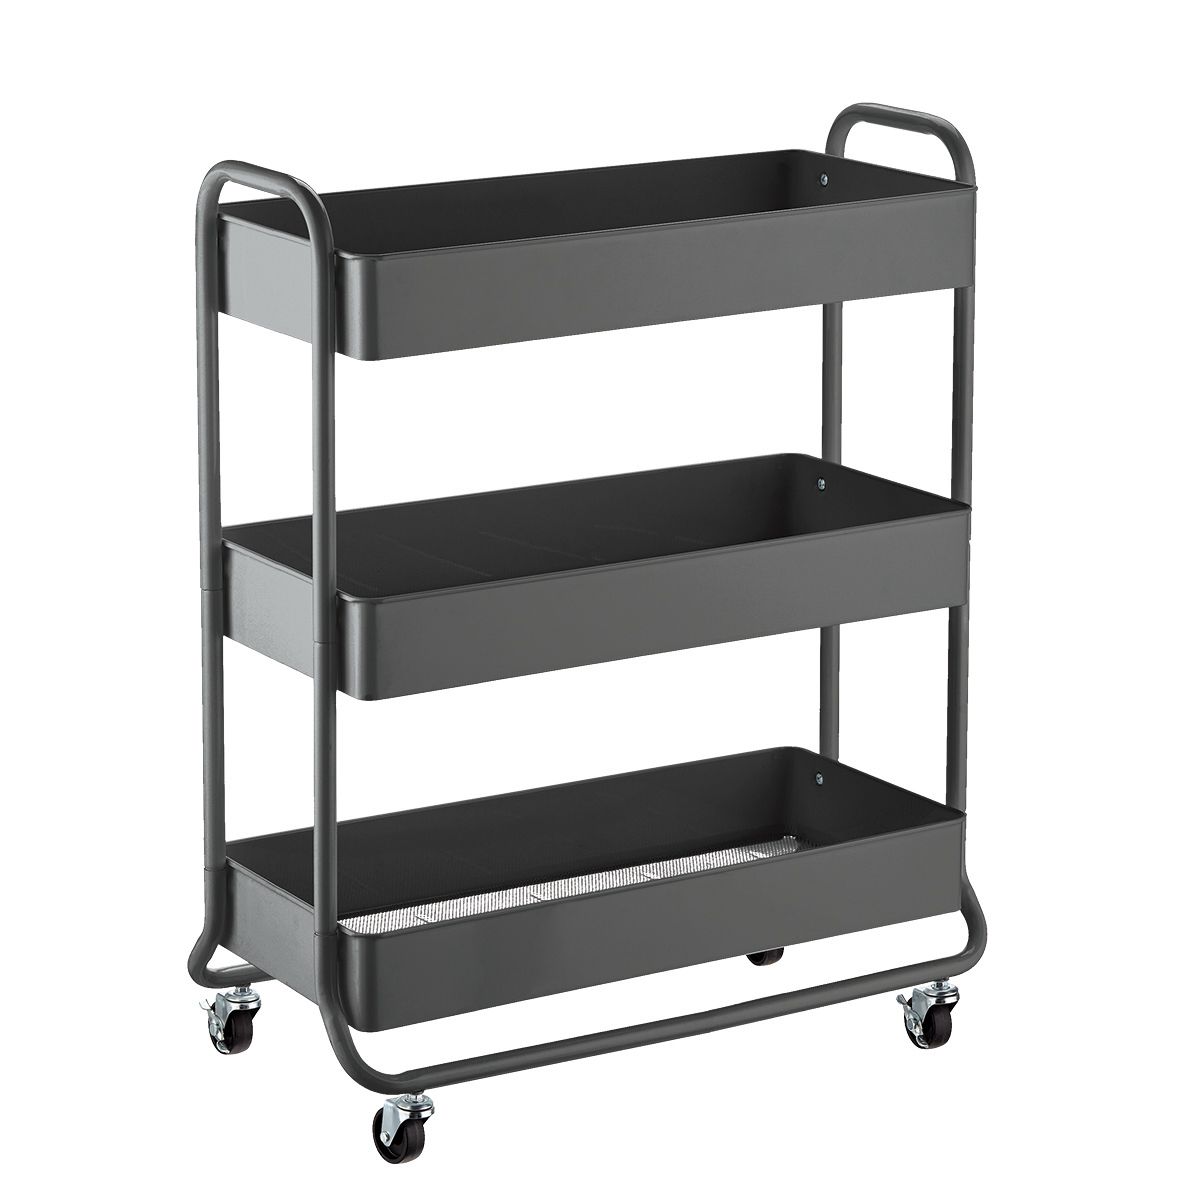 Large 3-Tier Rolling Cart Dark Grey | The Container Store